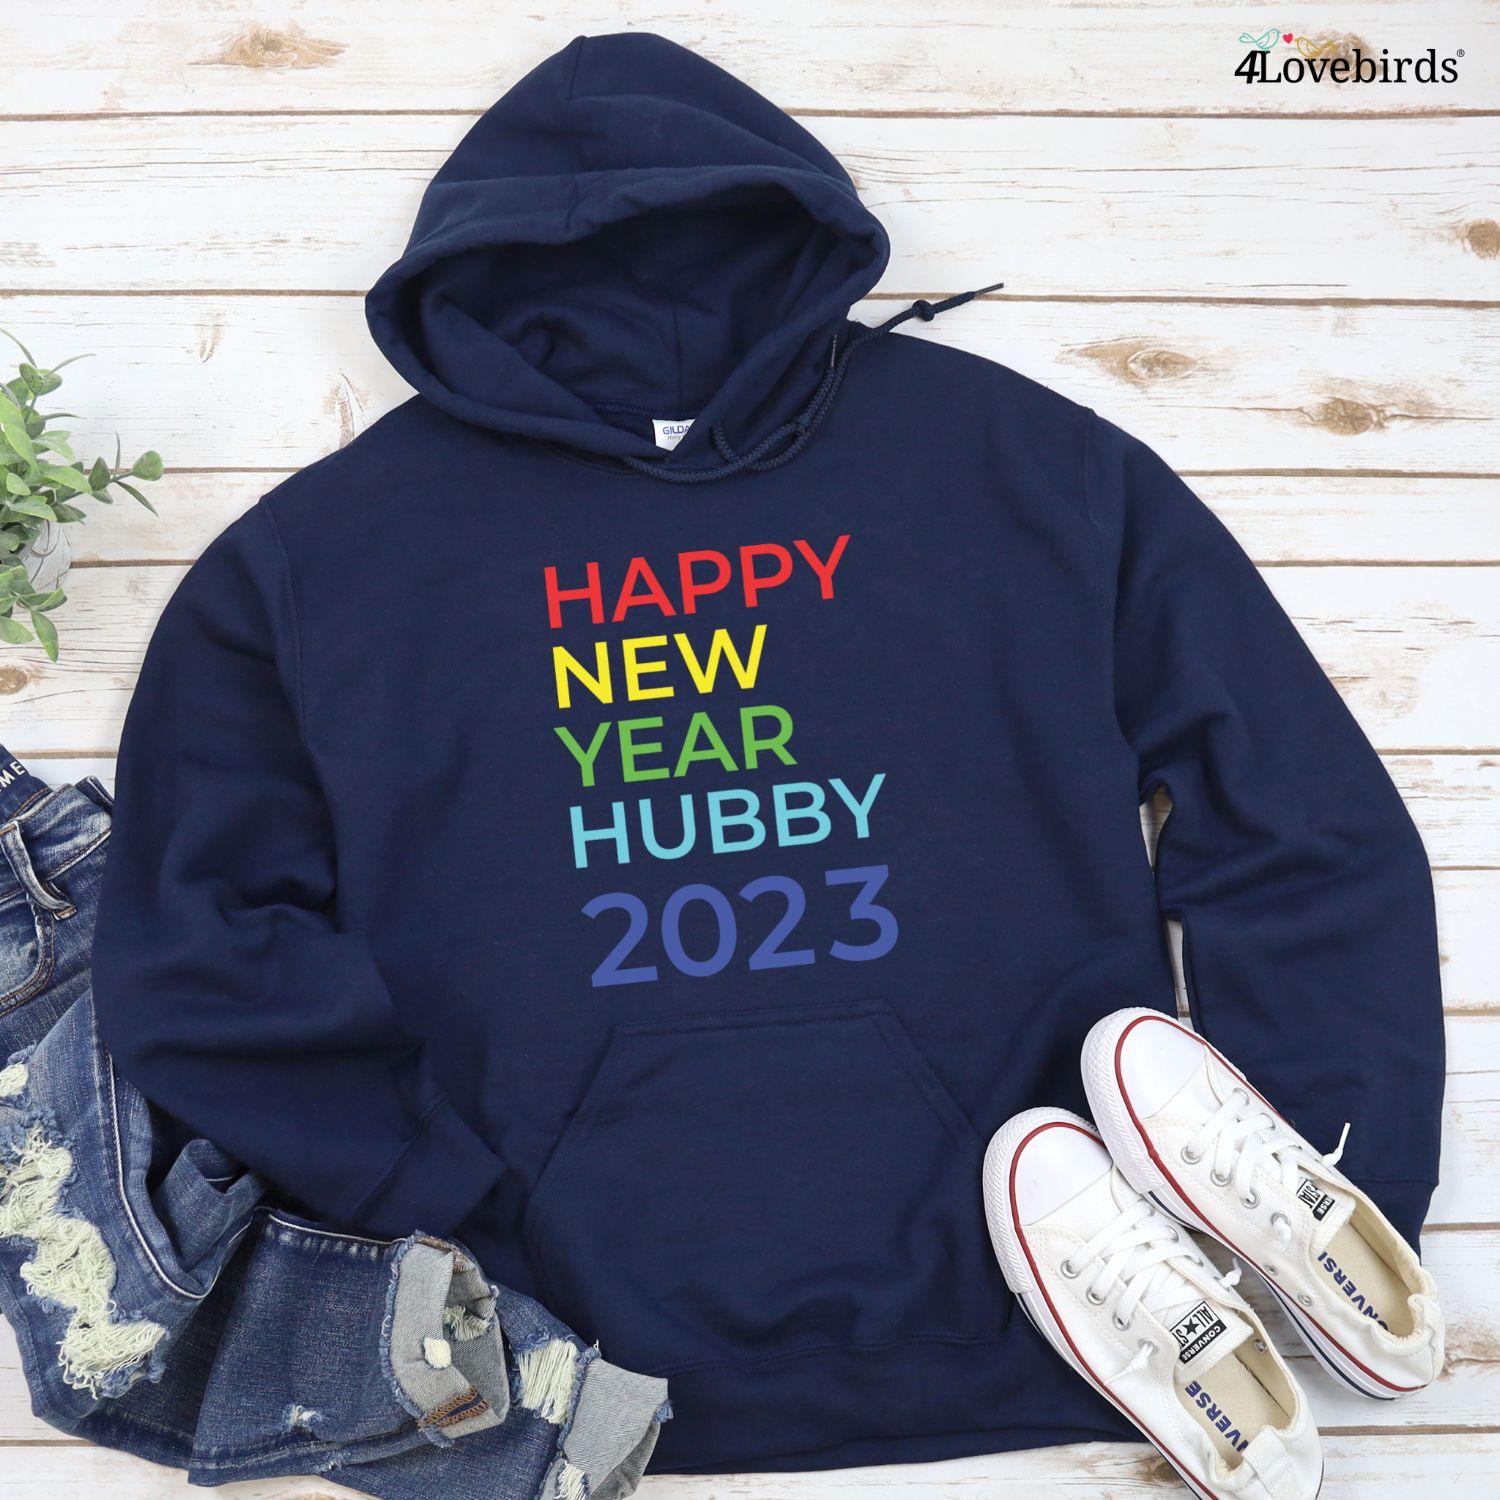 Happy New Year Custom Matching Set: Perfect Outfits for Couples & Lovers Alike! - 4Lovebirds